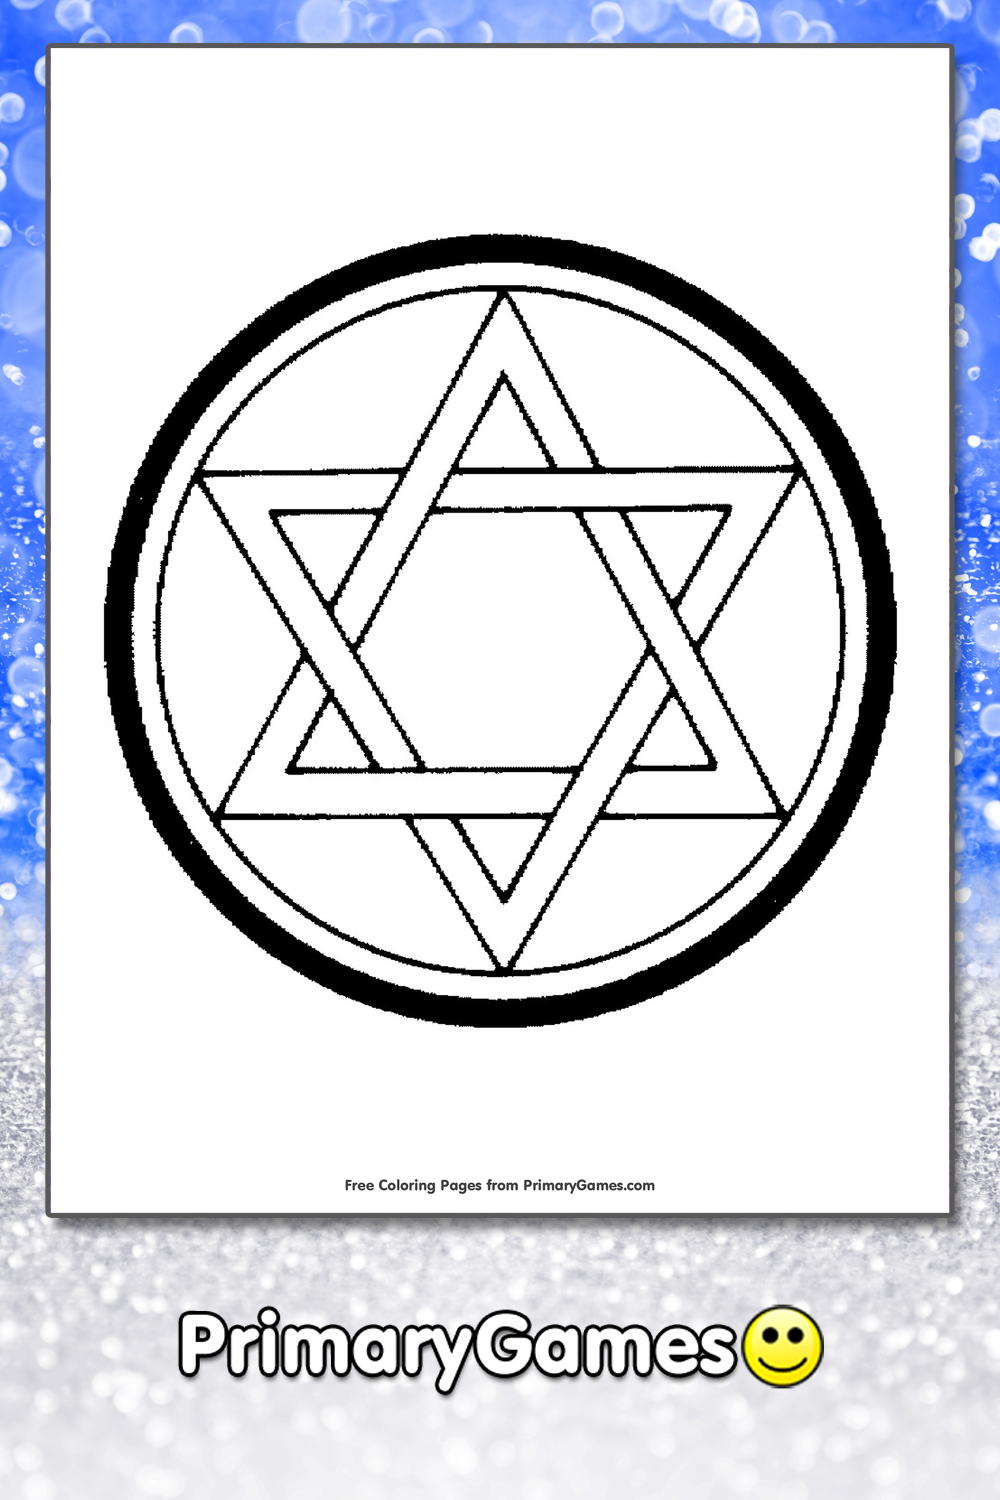 Star of david coloring page â free printable pdf from